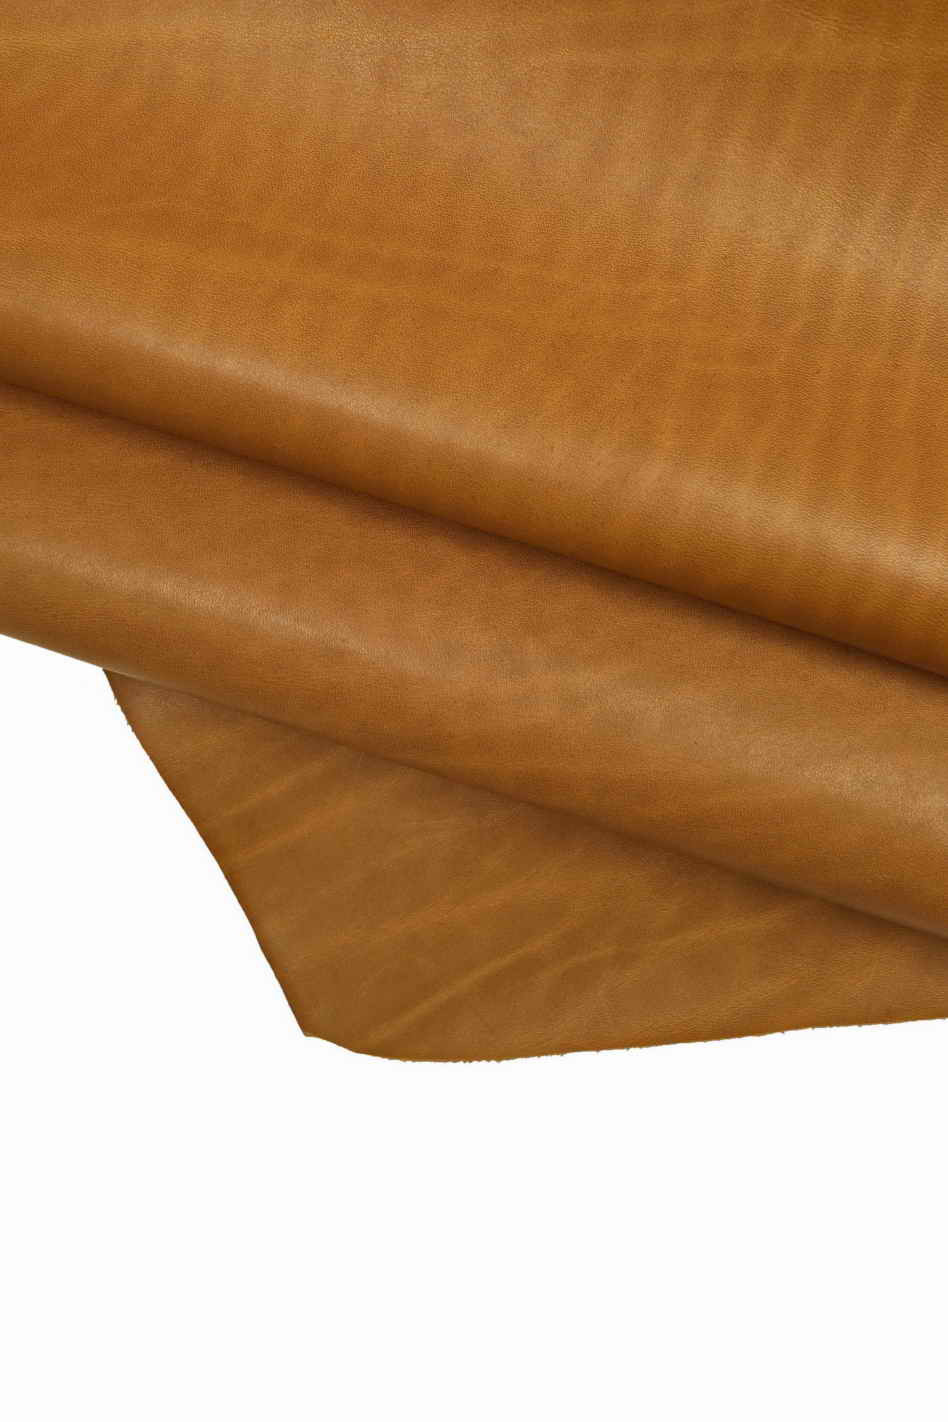 SMOOTH BROWN leather hide, distressed calfskin with visible veins